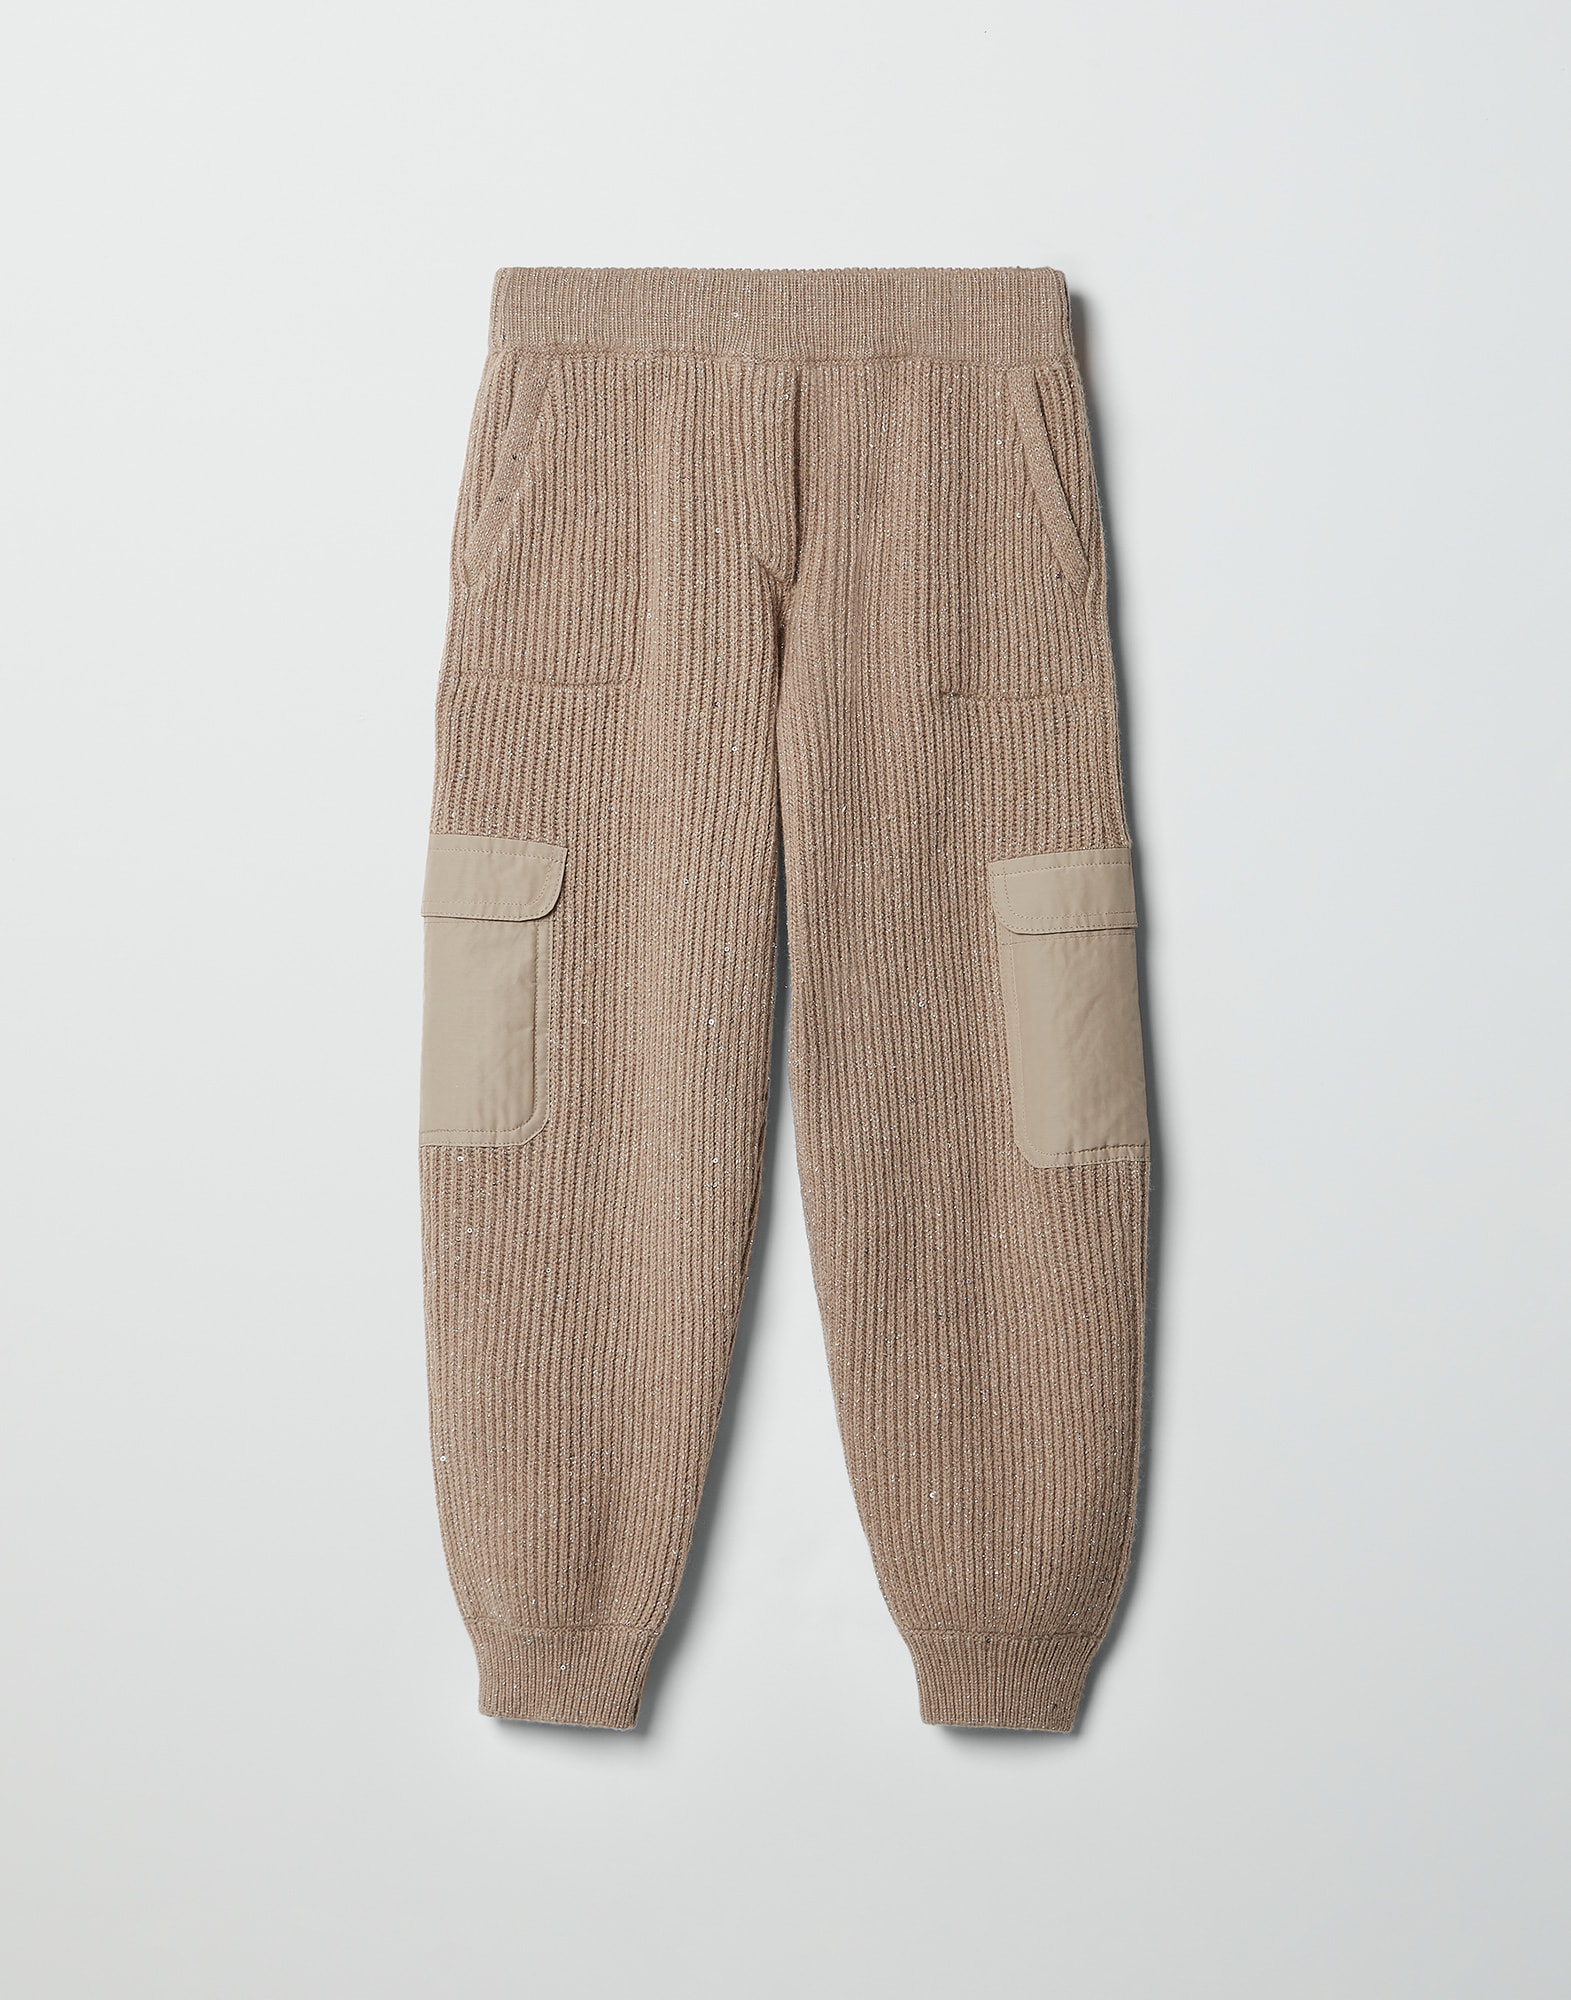 Panel trousers